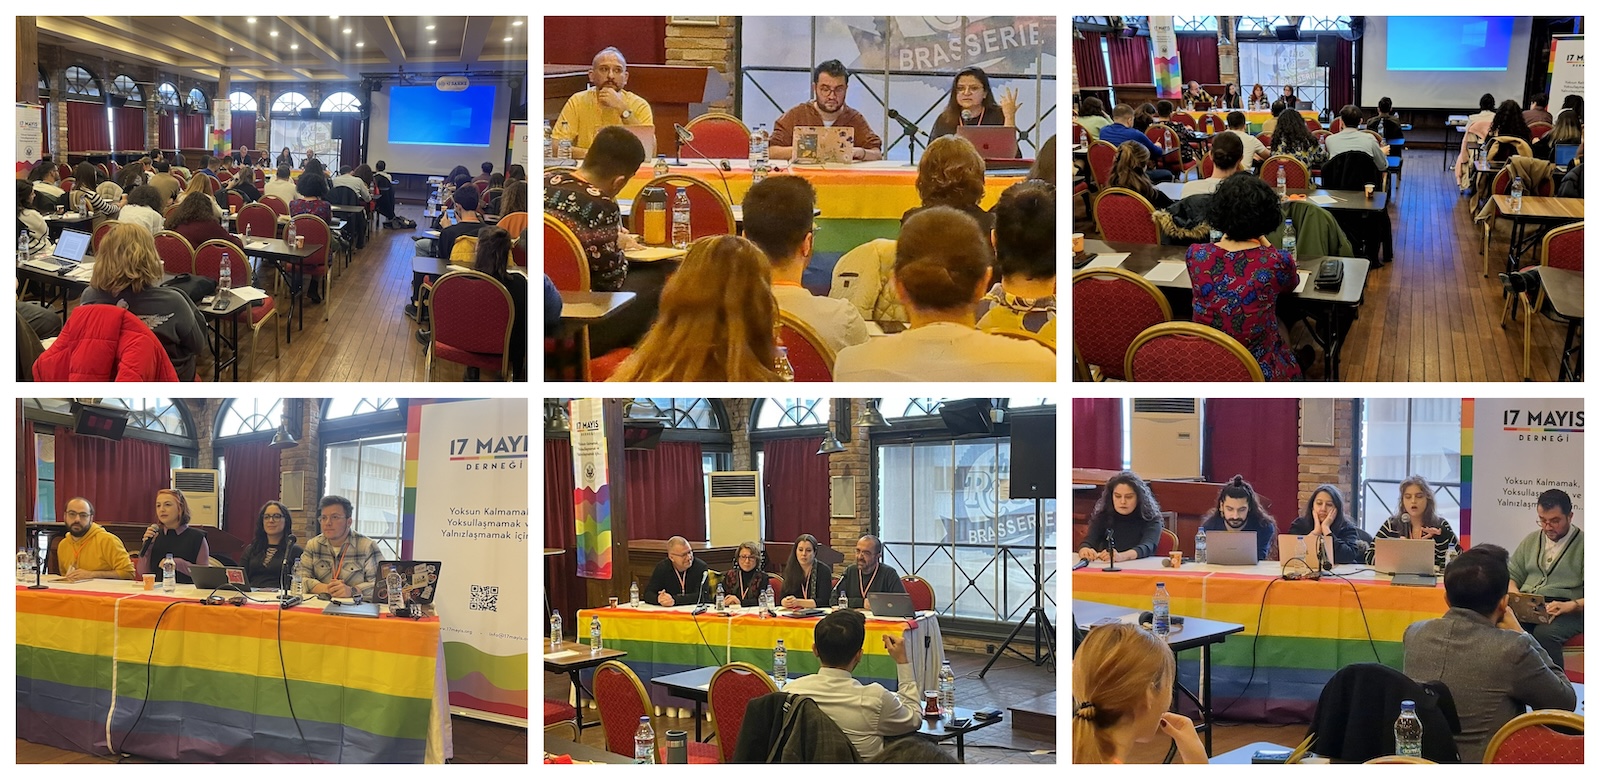 Lawyers, social workers and psychologists from 16 provinces were at the May 17 Association's Empowerment Conference | Kaos GL - News Portal for LGBTI+ News